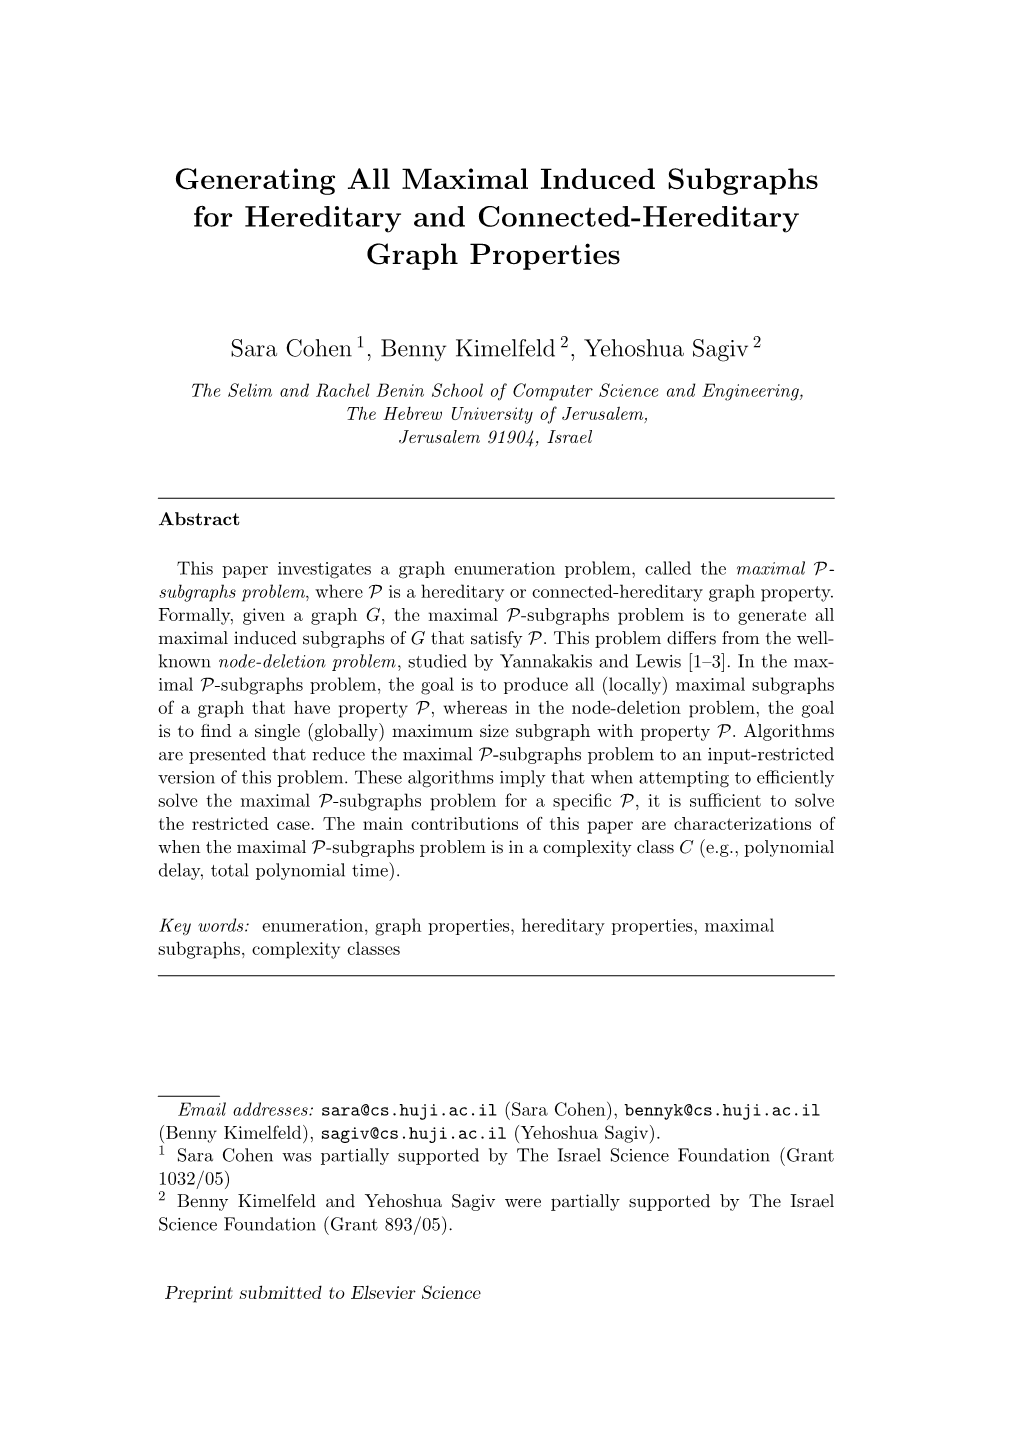 Generating All Maximal Induced Subgraphs for Hereditary and Connected-Hereditary Graph Properties